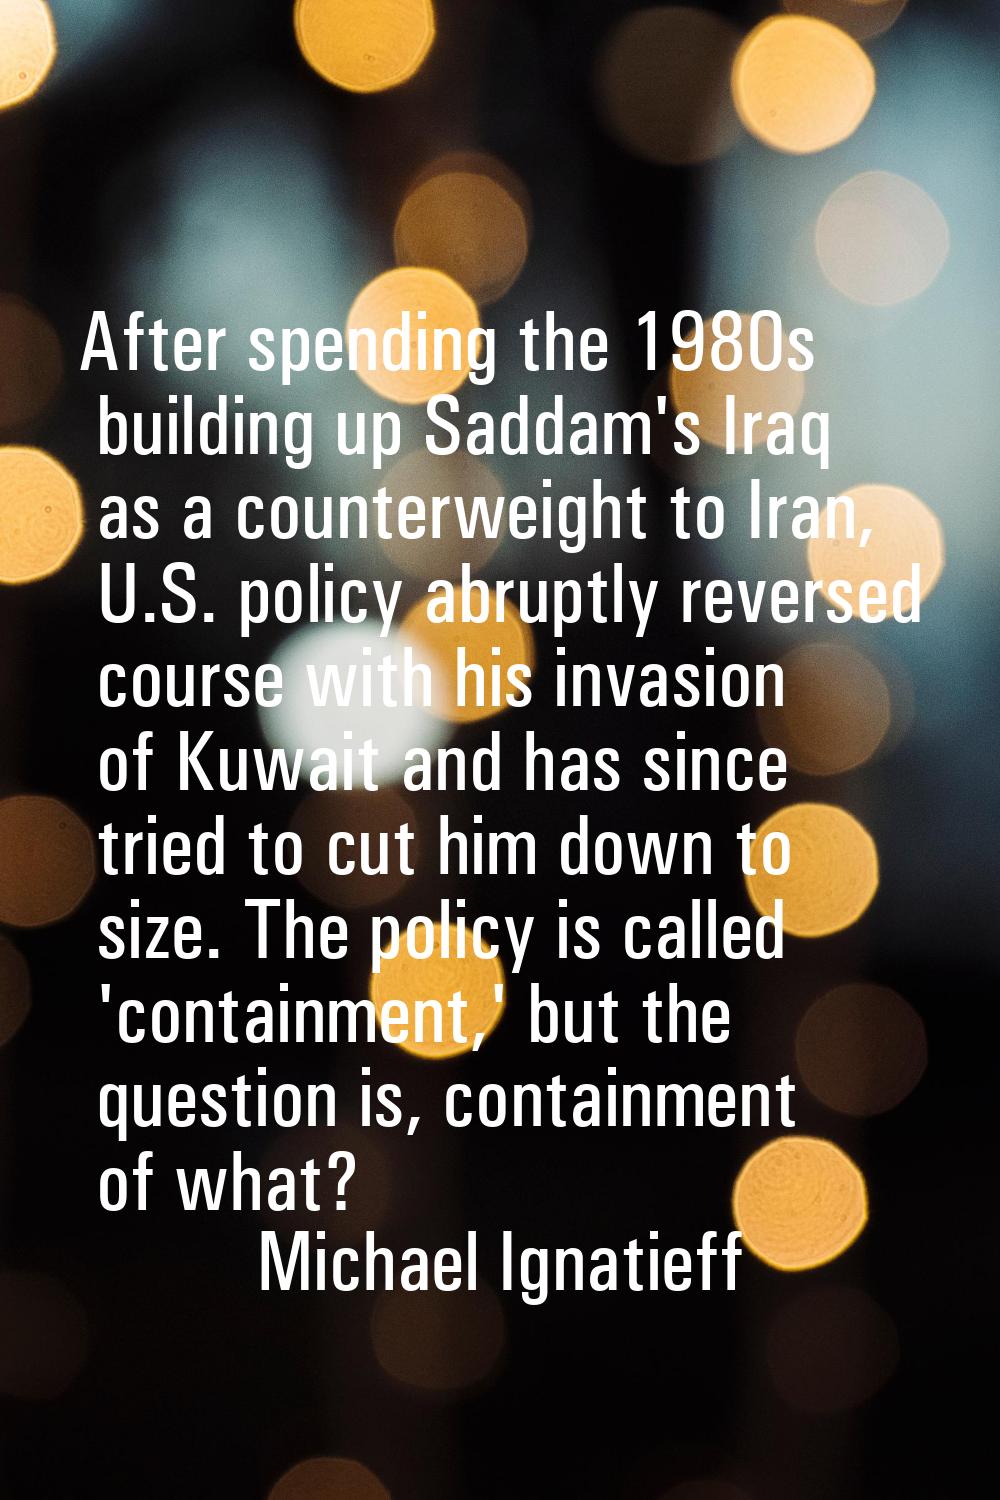 After spending the 1980s building up Saddam's Iraq as a counterweight to Iran, U.S. policy abruptly